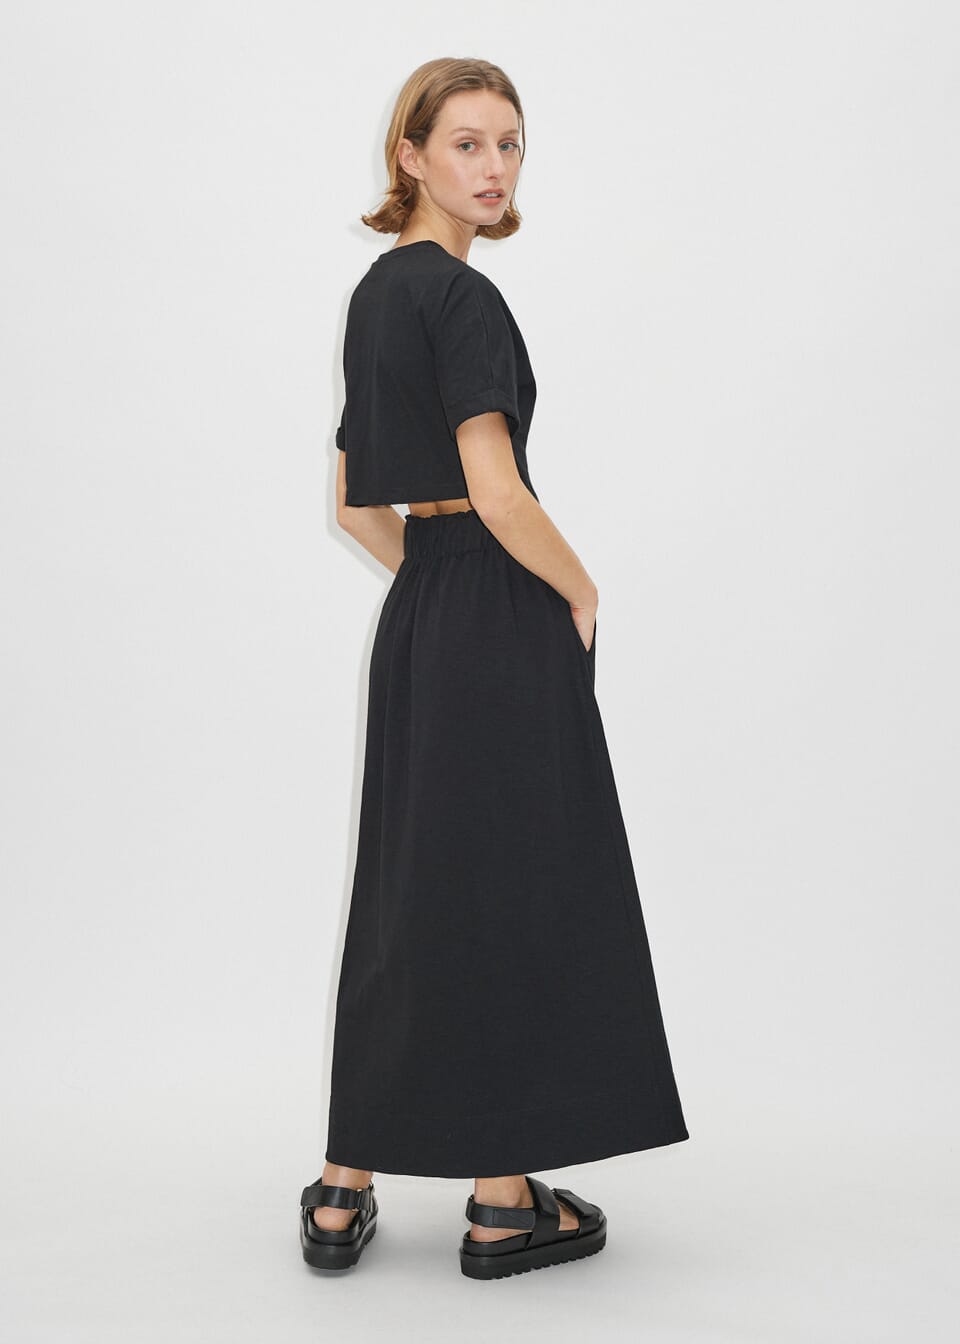 Me + Em black gathered t-shirt dress is a summer staple. A clean-cut silhouette and a hue that speaks to daytime and evening styling both on holiday and at home. This maxi dress features a classic short-sleeved silhouette and a flattering cut-out at the back alongside a gathered waist.